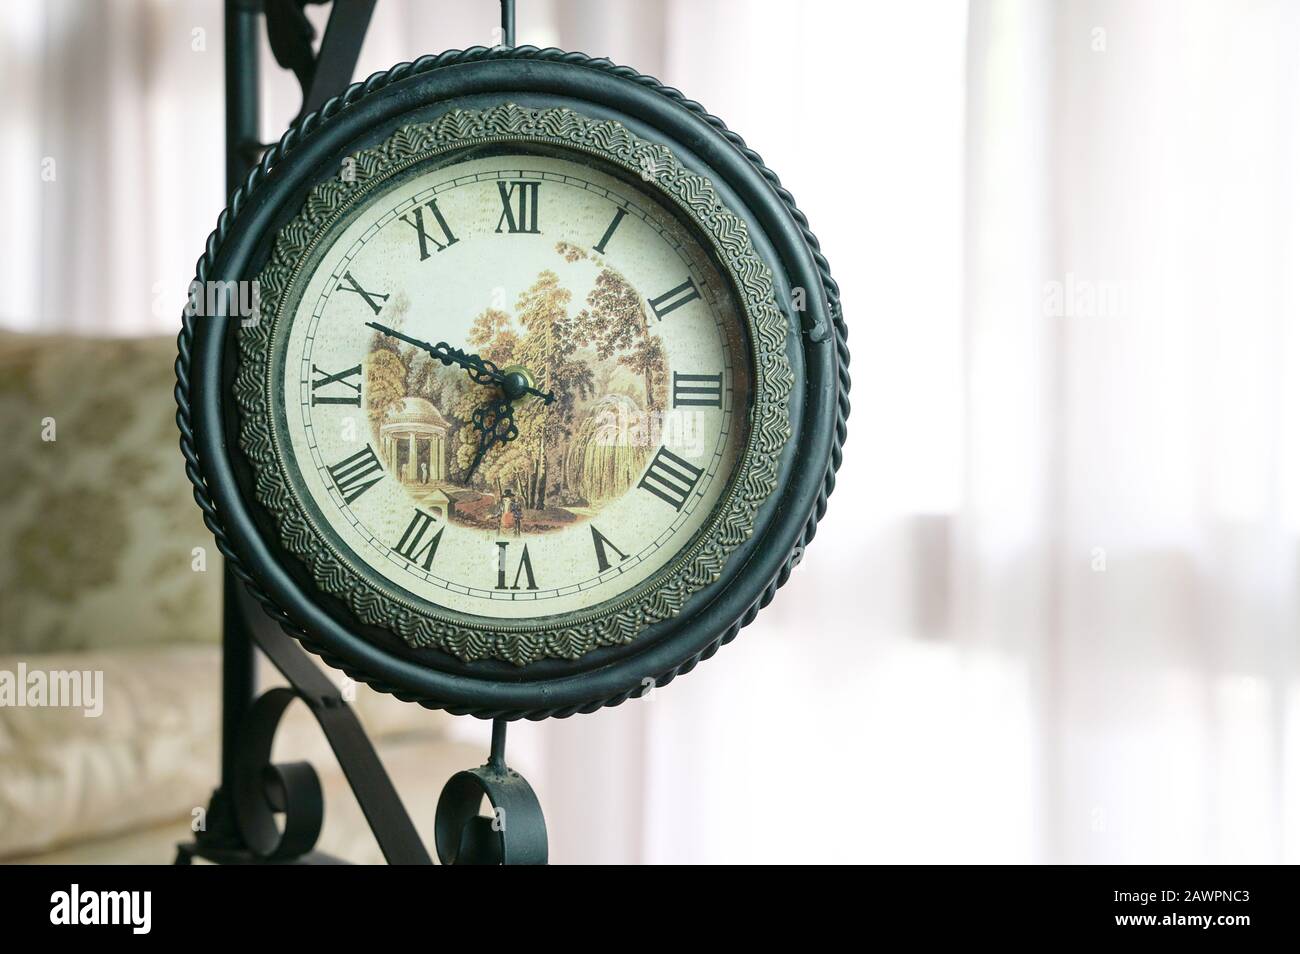 Vintage clock made of steel, inside a room. Cosy environment. Copy space. Stock Photo